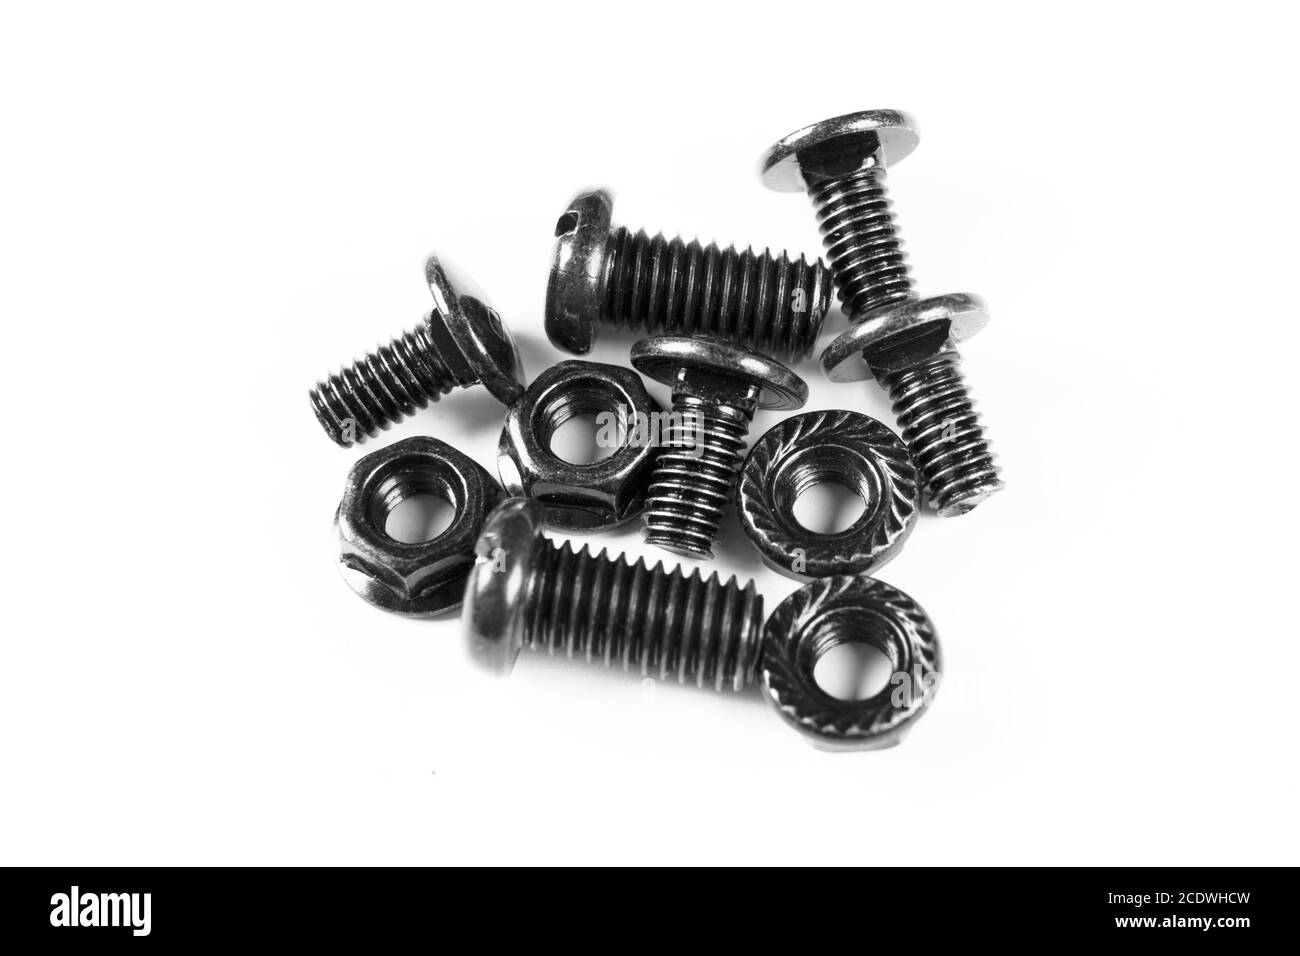 Black metal bolts and nuts  in a row. Black screw bolts and nuts isolated. Steel bolts and nuts pattern. Stock Photo